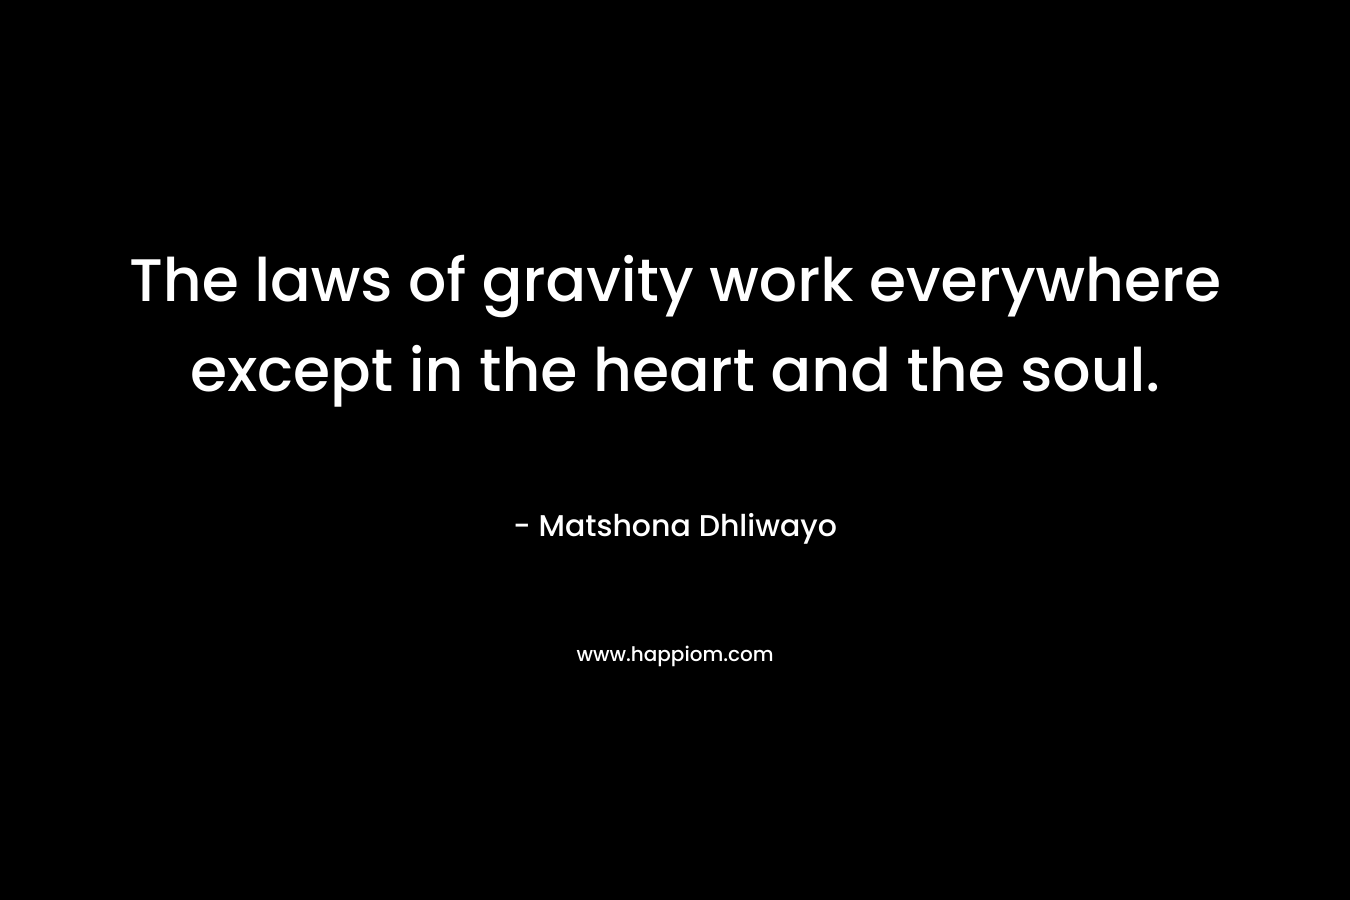 The laws of gravity work everywhere except in the heart and the soul.